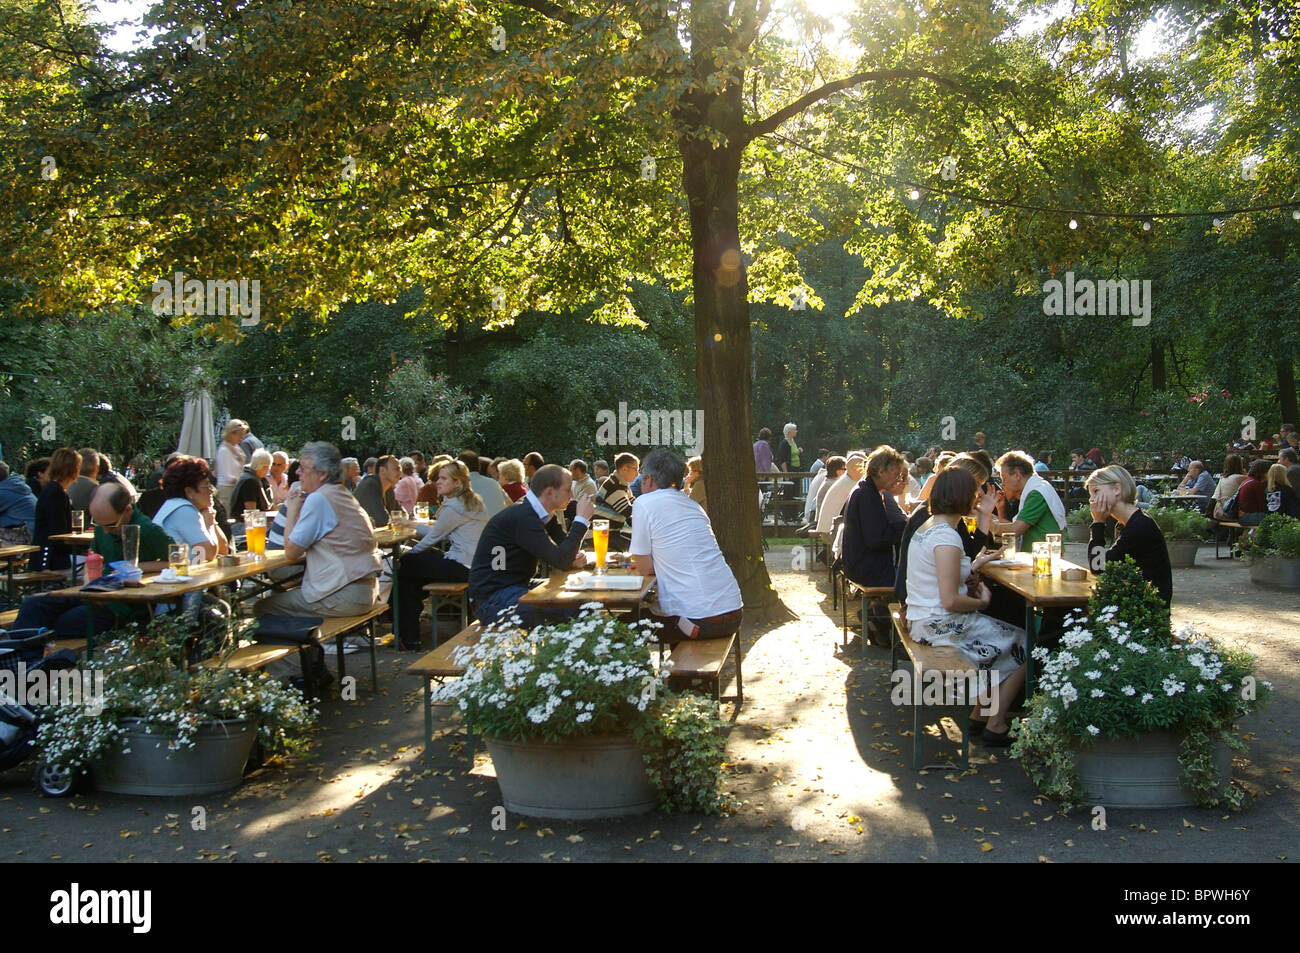 People under a shady tree at Am Neuen See cafe terrace at the end of the day in Berlin Stock Photo